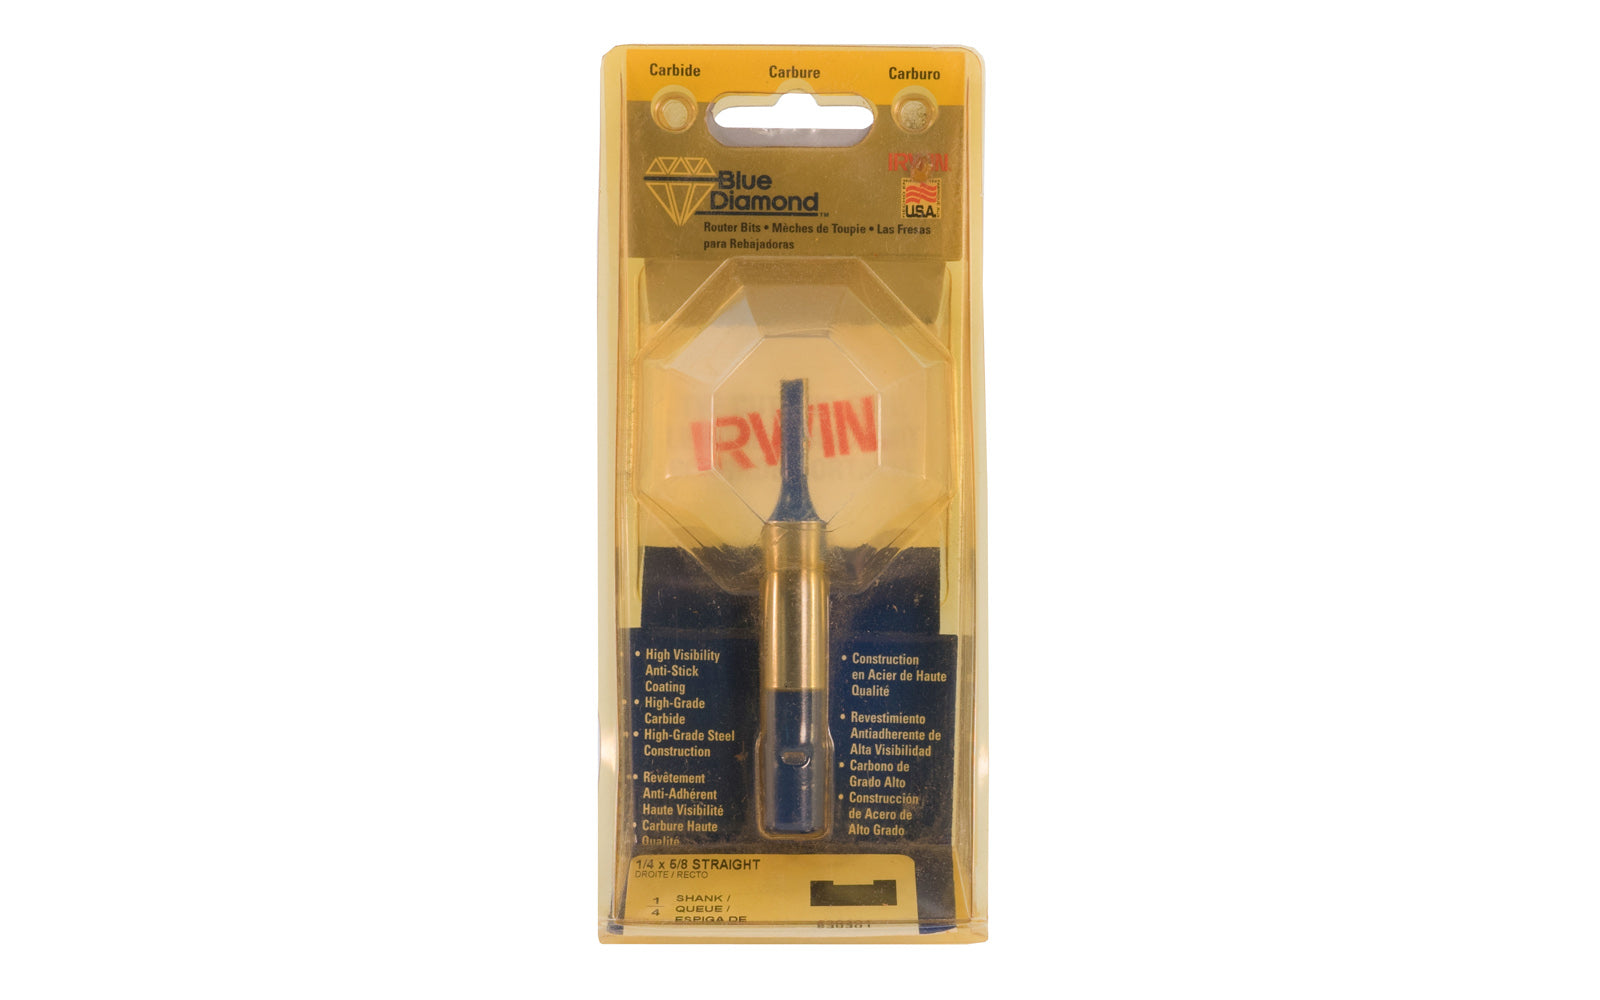 Irwin Carbide 1/4" x 5/8" Straight Router Bit - Made in USA. Carbide - High Grade Steel construction Router Bit. 5/8" depth. 2-1/4" overall length. 1/2" shank. Irwin Blue Diamond Model No. 530301. Made in USA.